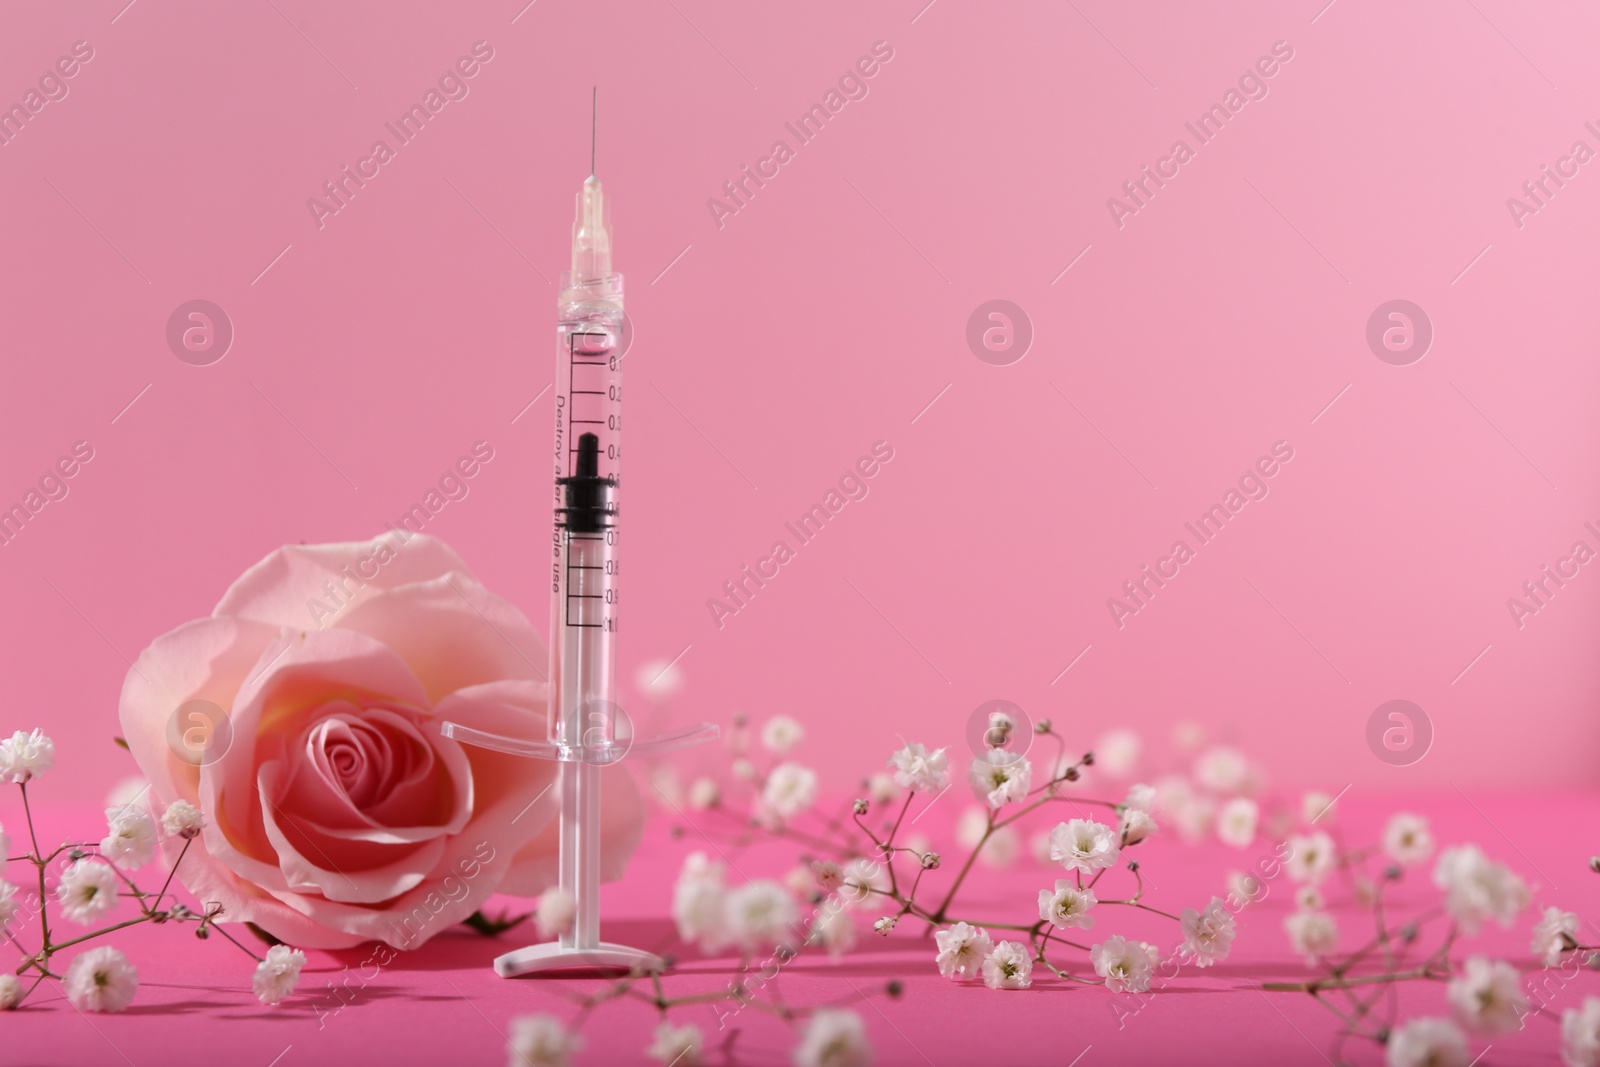 Photo of Cosmetology. Medical syringe, rose and gypsophila flowers on pink background, space for text